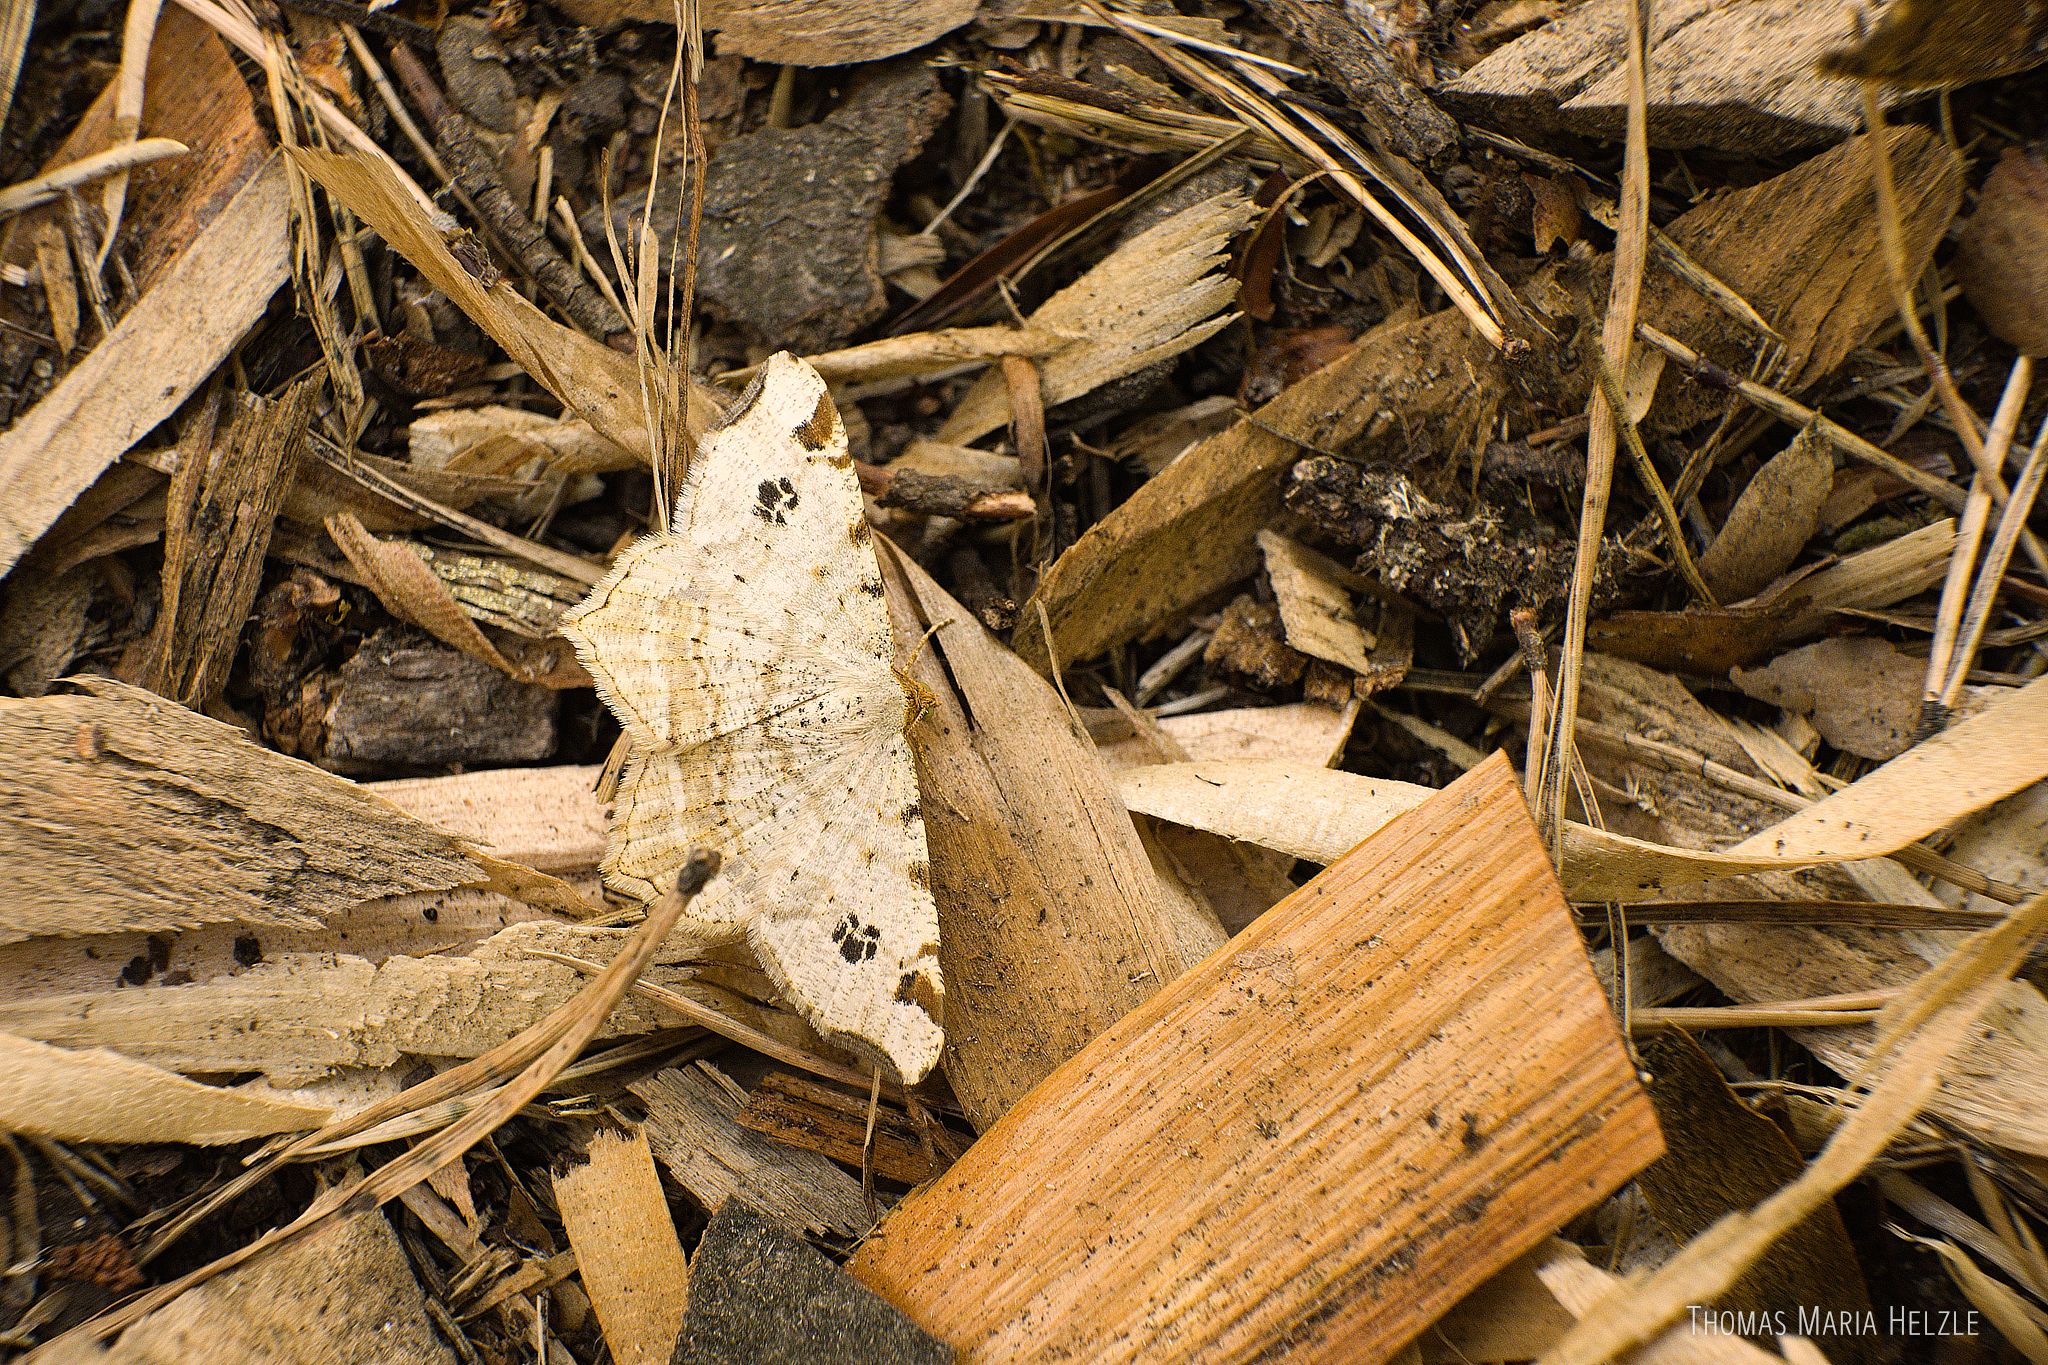 An extremely well disguised moth sitting on the wood shavings from my sculptures. It is beige-white with small abstract pattern onn the wings and was absolutely invisible from a distance...